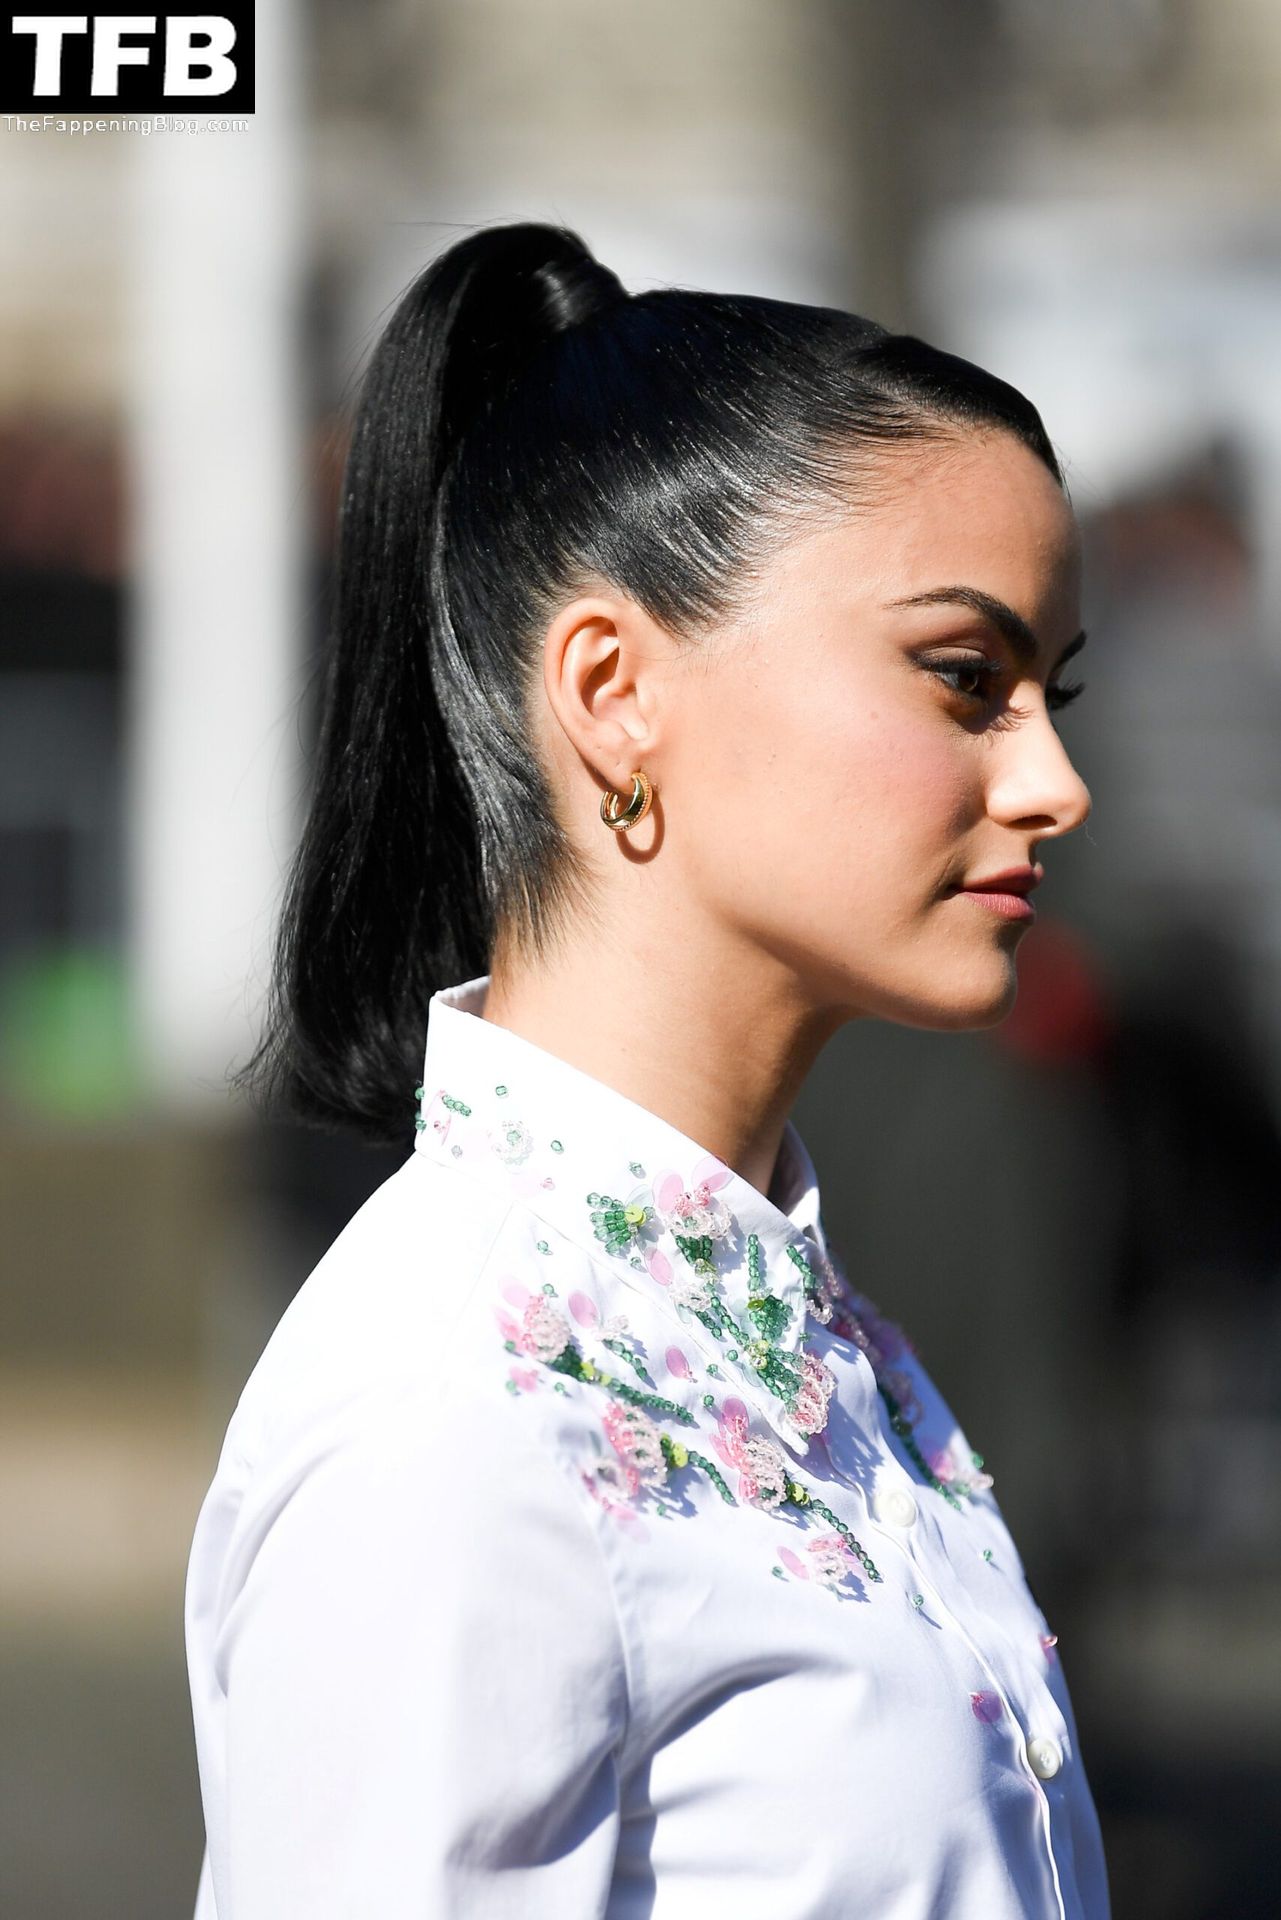 Camila-Mendes-Sexy-The-Fappening-Blog-66.jpg